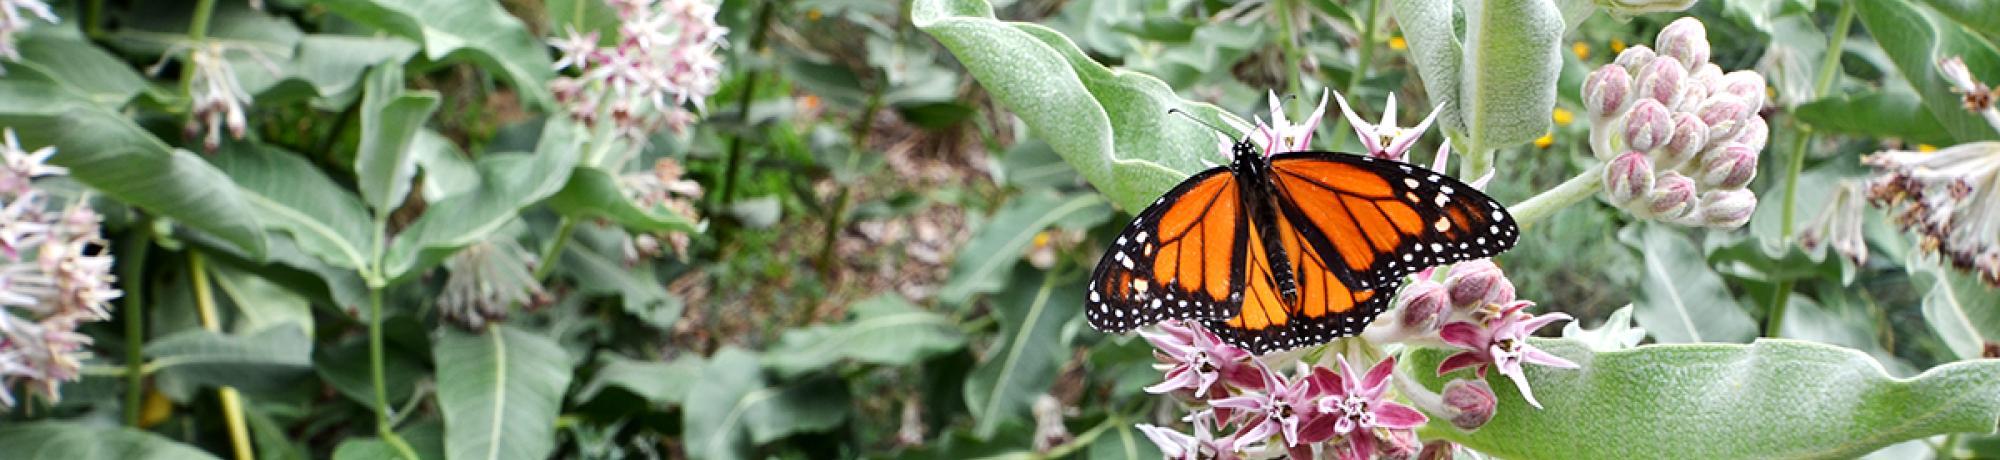 A black and orange monarch butterfly landed on a milkweed plant with pinkish purple clusters of flowers with pointed petals.